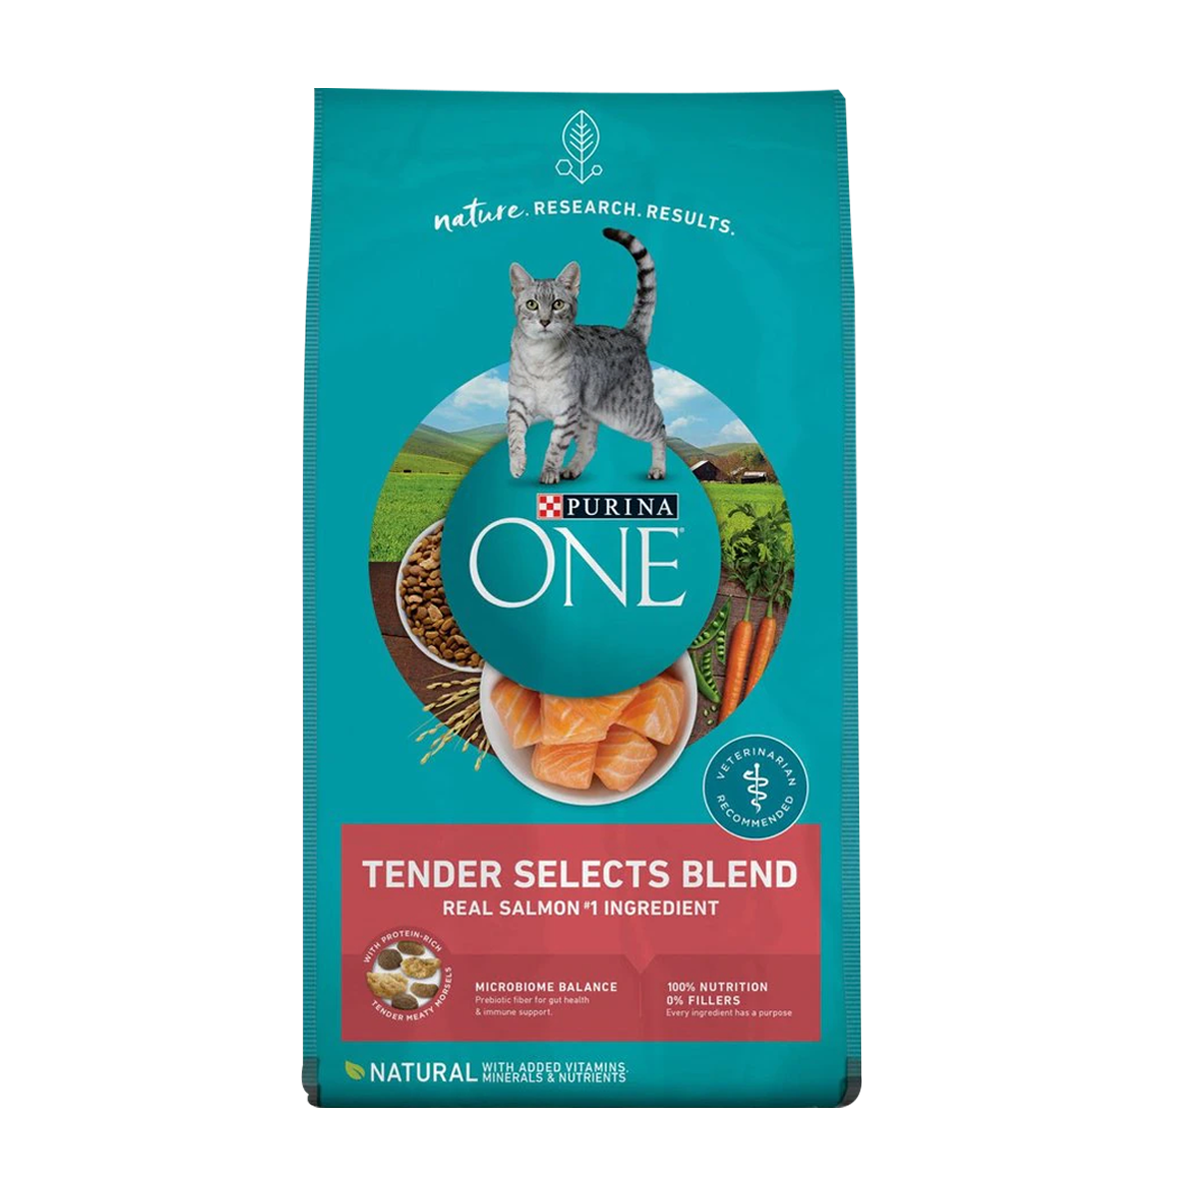 Purina-One-cat-tender-selects-salmon